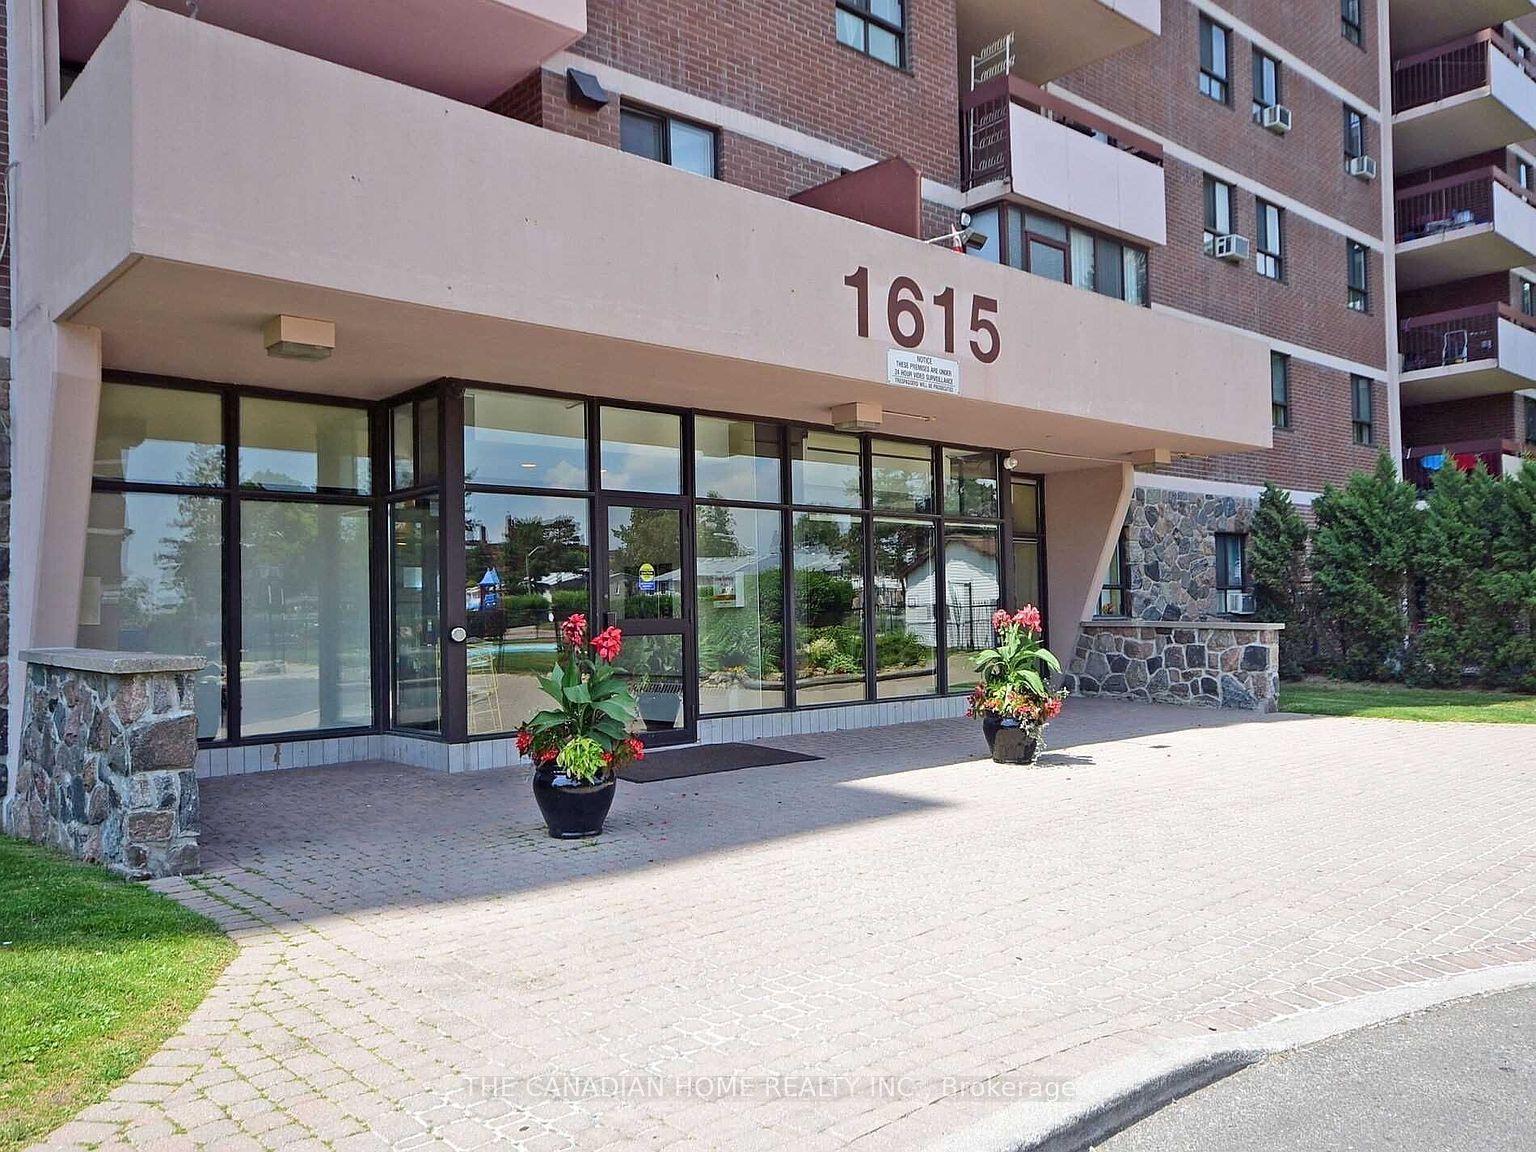 Condo Apt house for sale at 1615 Bloor St E Mississauga Ontario